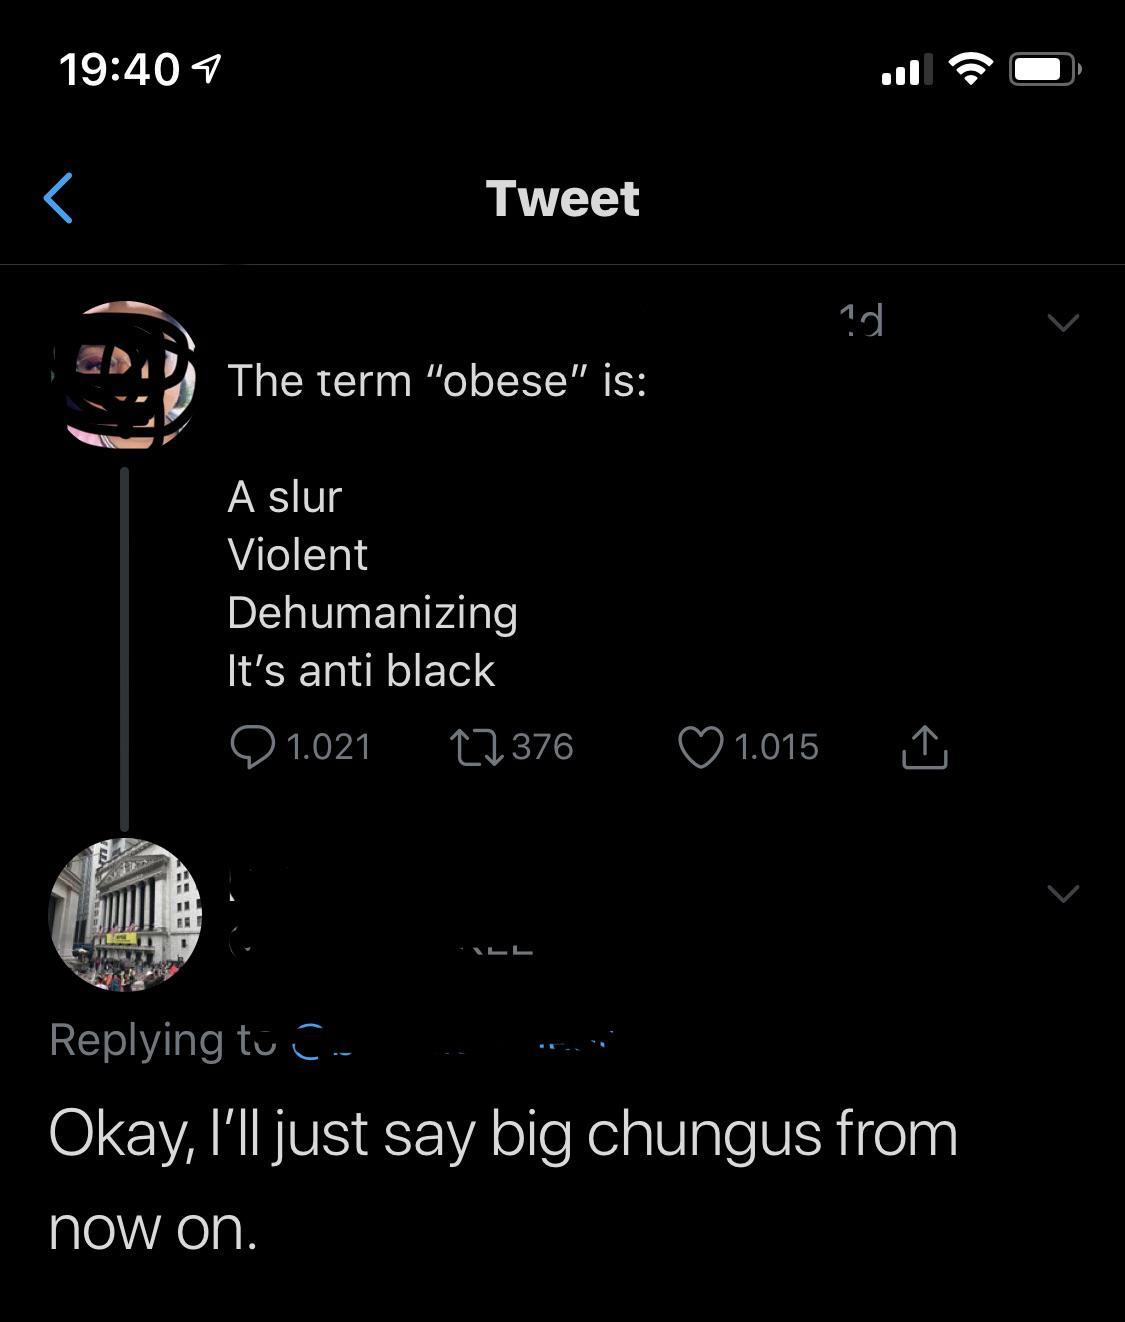 The term "obese" is A slur Violent Dehumanizing It's anti black Okay, I'll just say big chungus from now on.